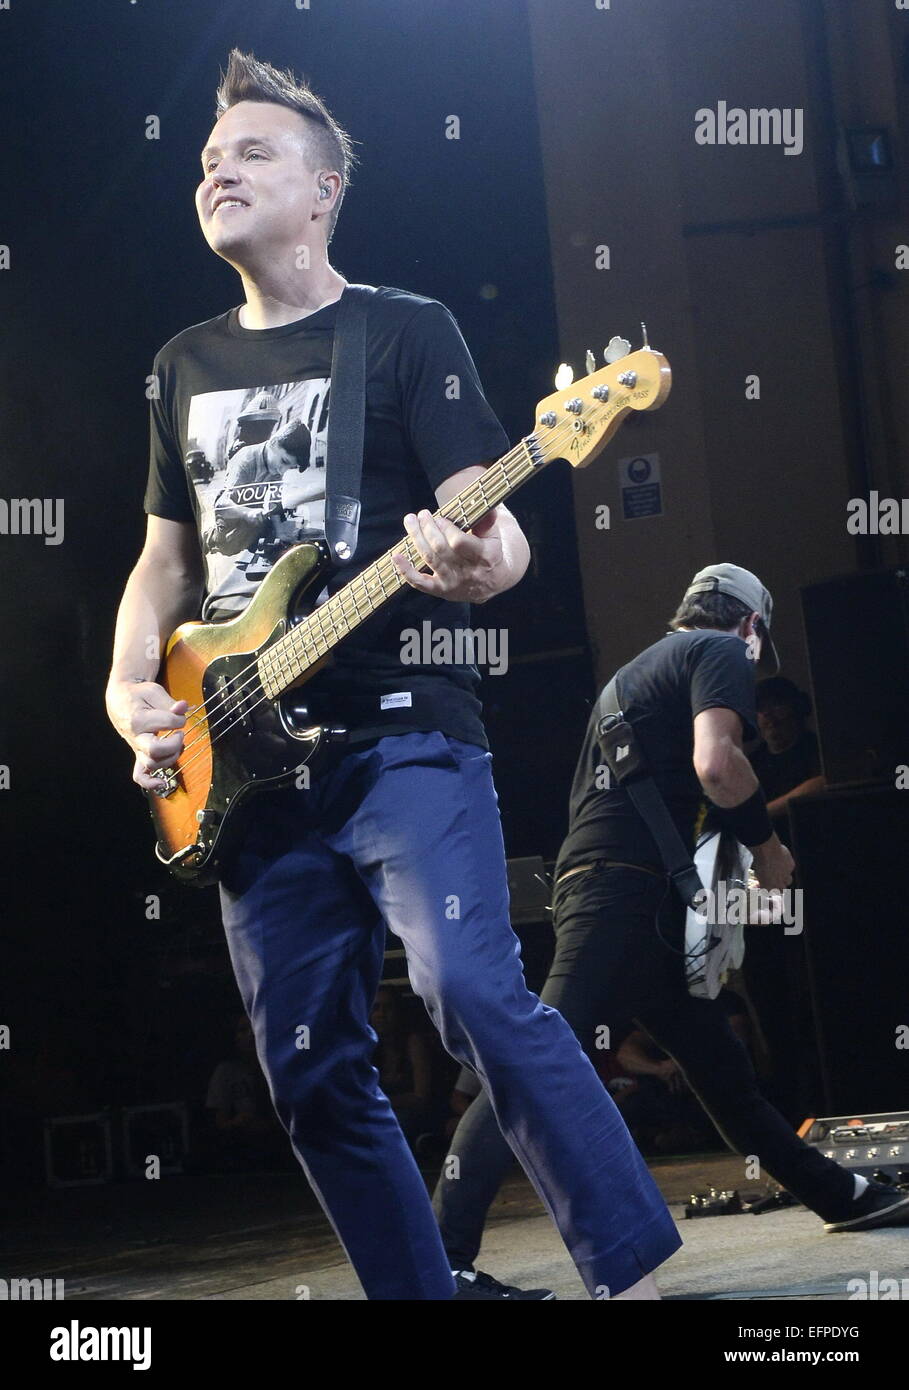 Blink 182 perform live in concert at the Brixton Academy Featuring ...